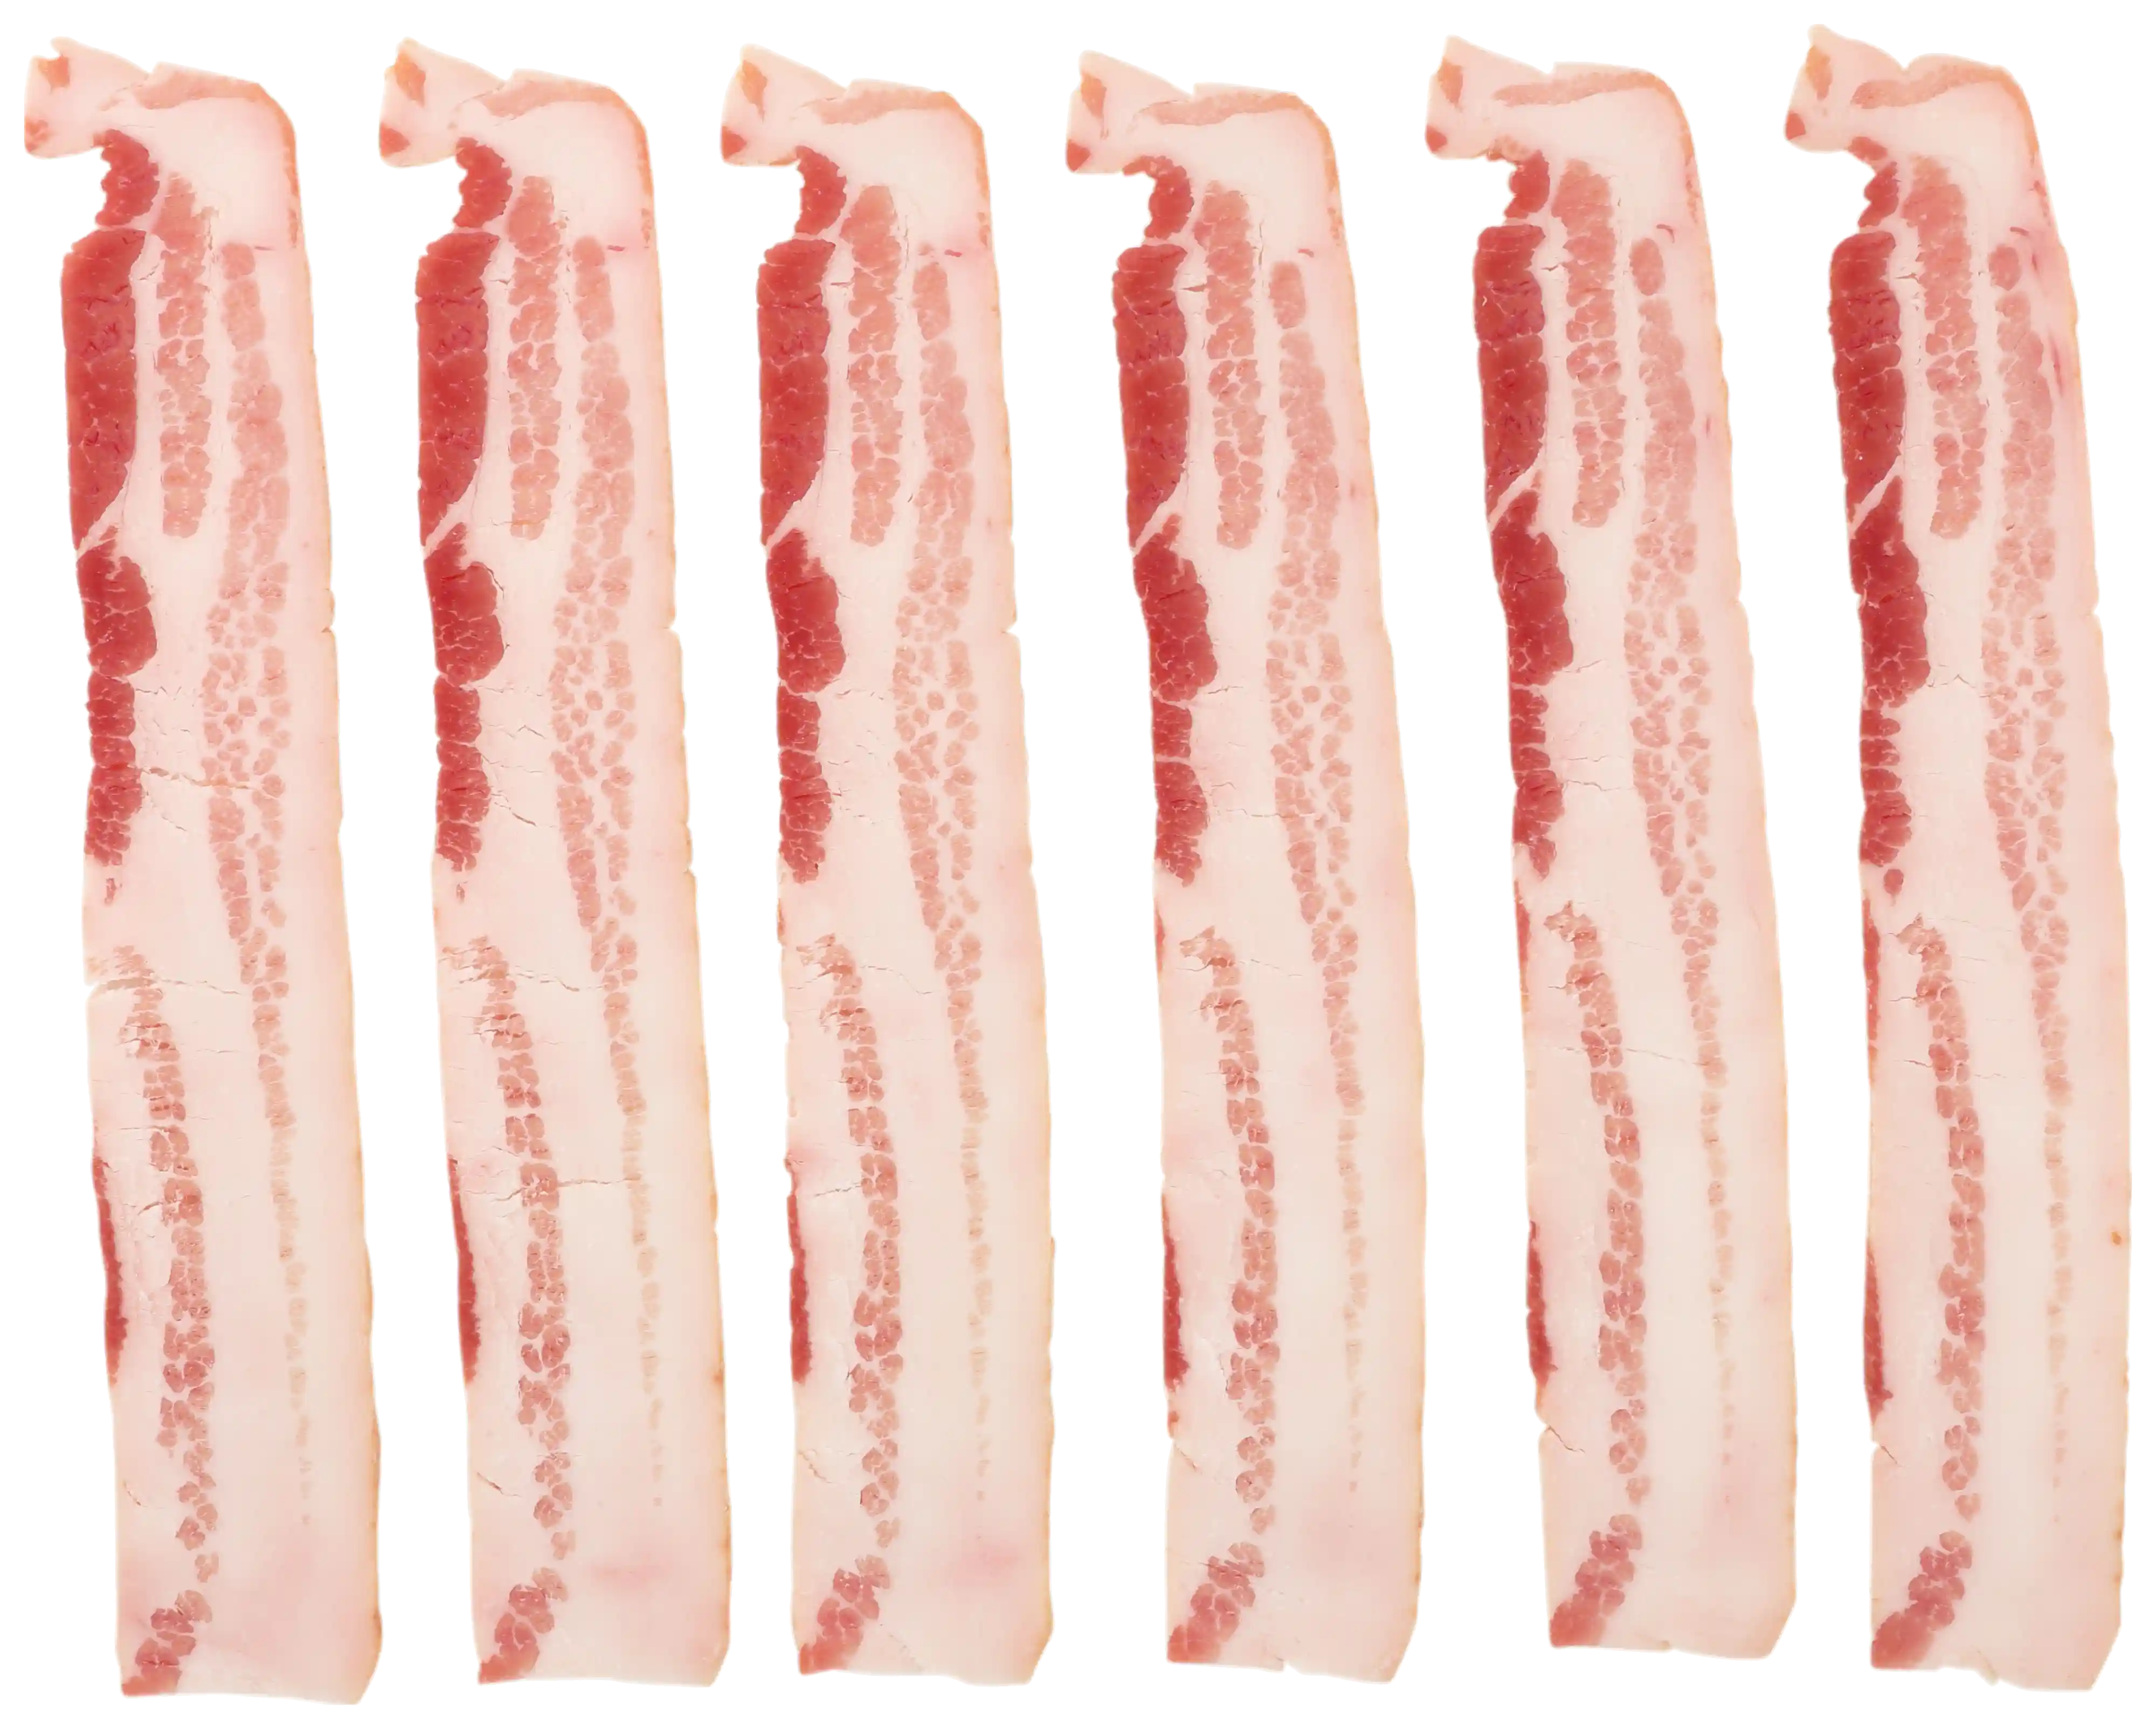 Wright® Brand Naturally Hickory Smoked Regular Sliced Bacon, Bulk, 15 Lbs, 10-14 Slices per Pound, Frozen_image_11